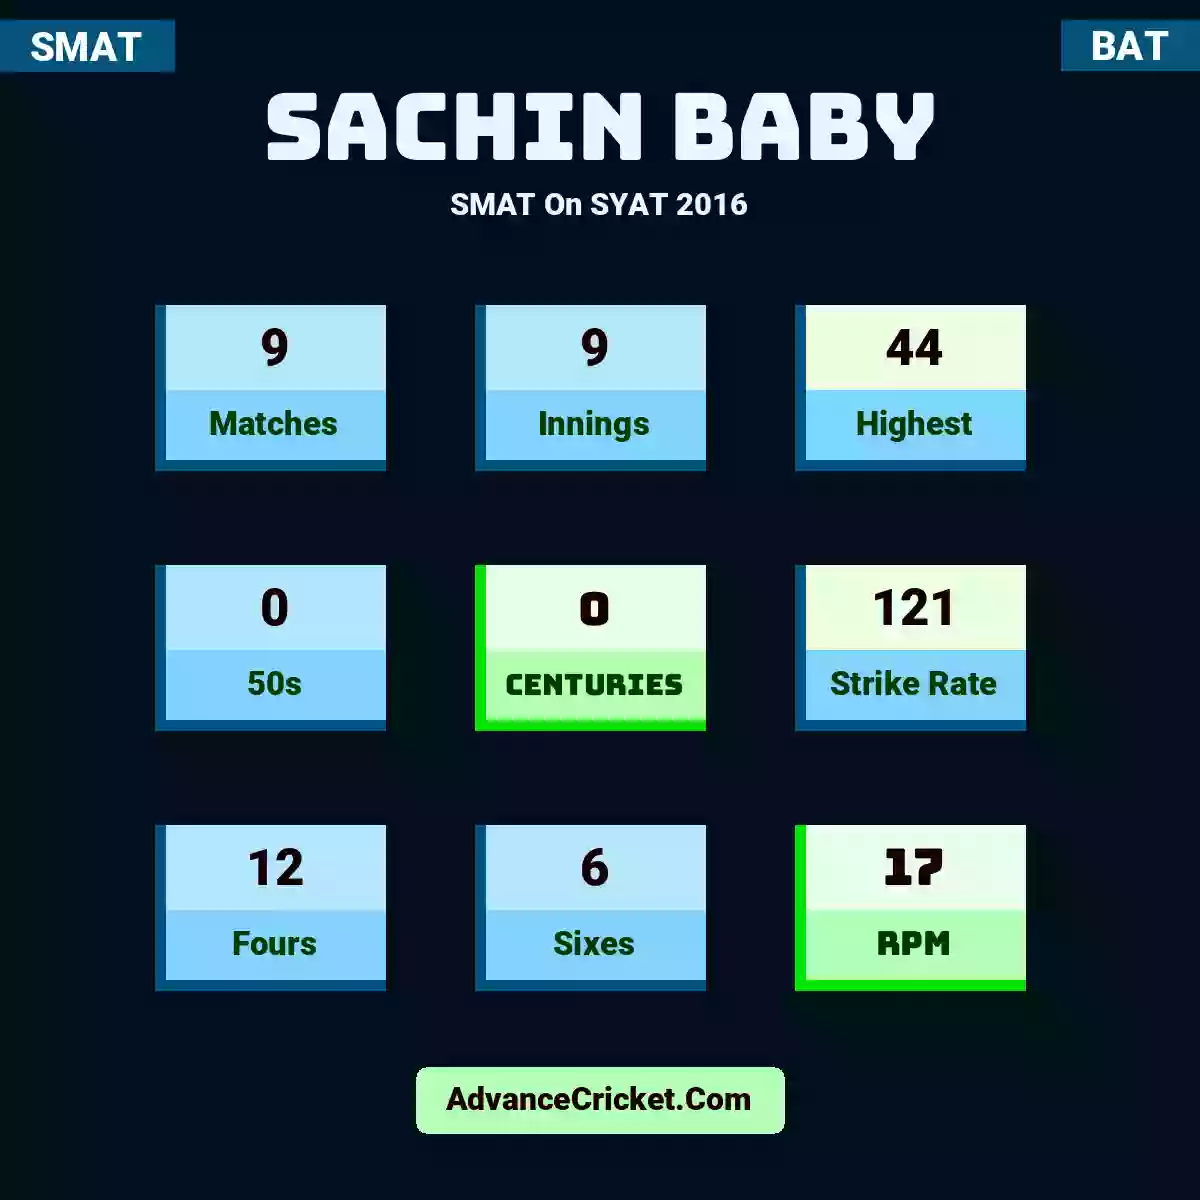 Sachin Baby SMAT  On SYAT 2016, Sachin Baby played 9 matches, scored 44 runs as highest, 0 half-centuries, and 0 centuries, with a strike rate of 121. S.Baby hit 12 fours and 6 sixes, with an RPM of 17.